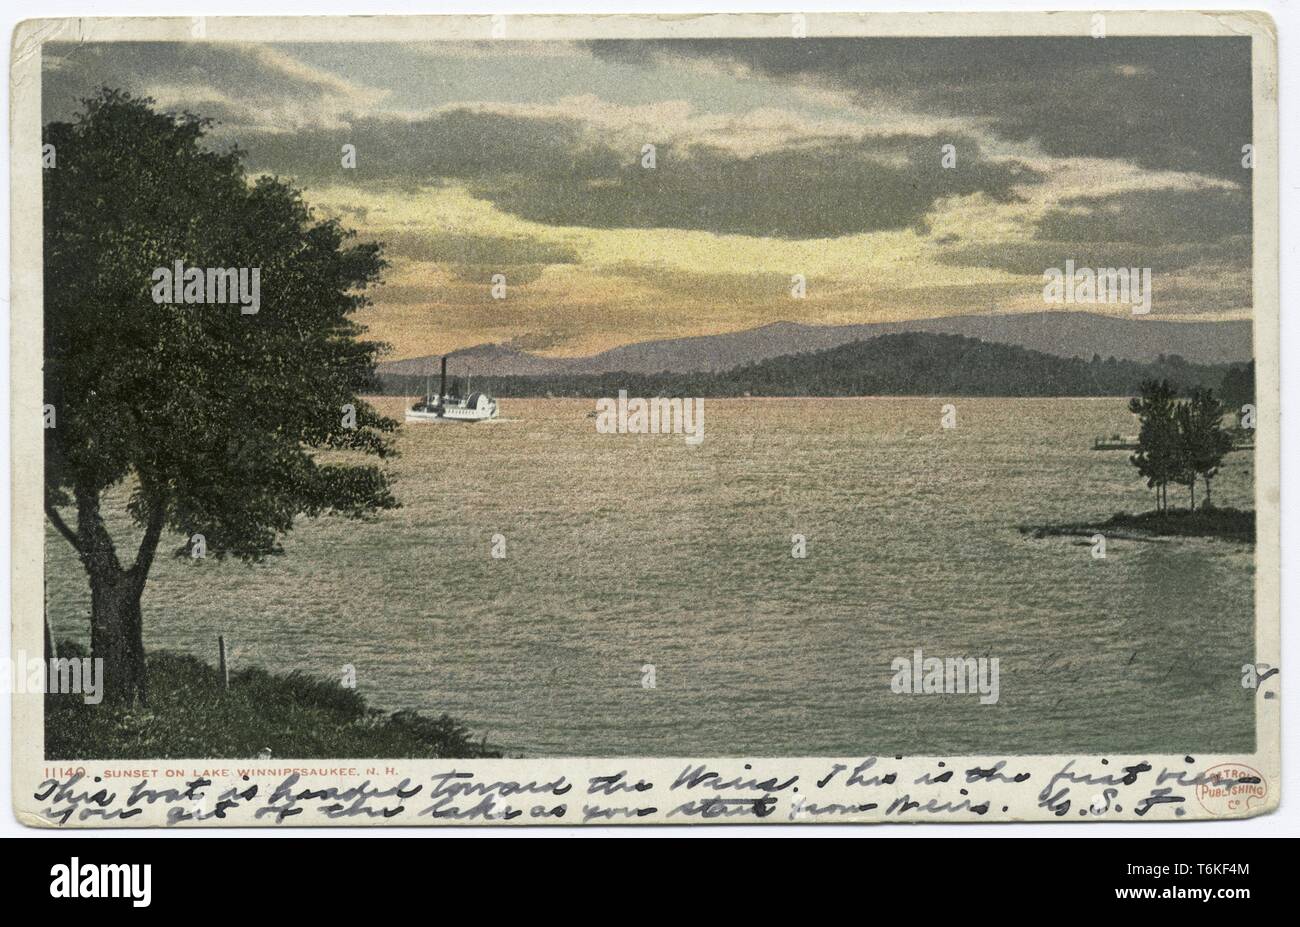 Detroit Publishing Company vintage postcard of Lake Winnipesaukee in New Hampshire; sunset and steam boat, 1914. From the New York Public Library. () Stock Photo